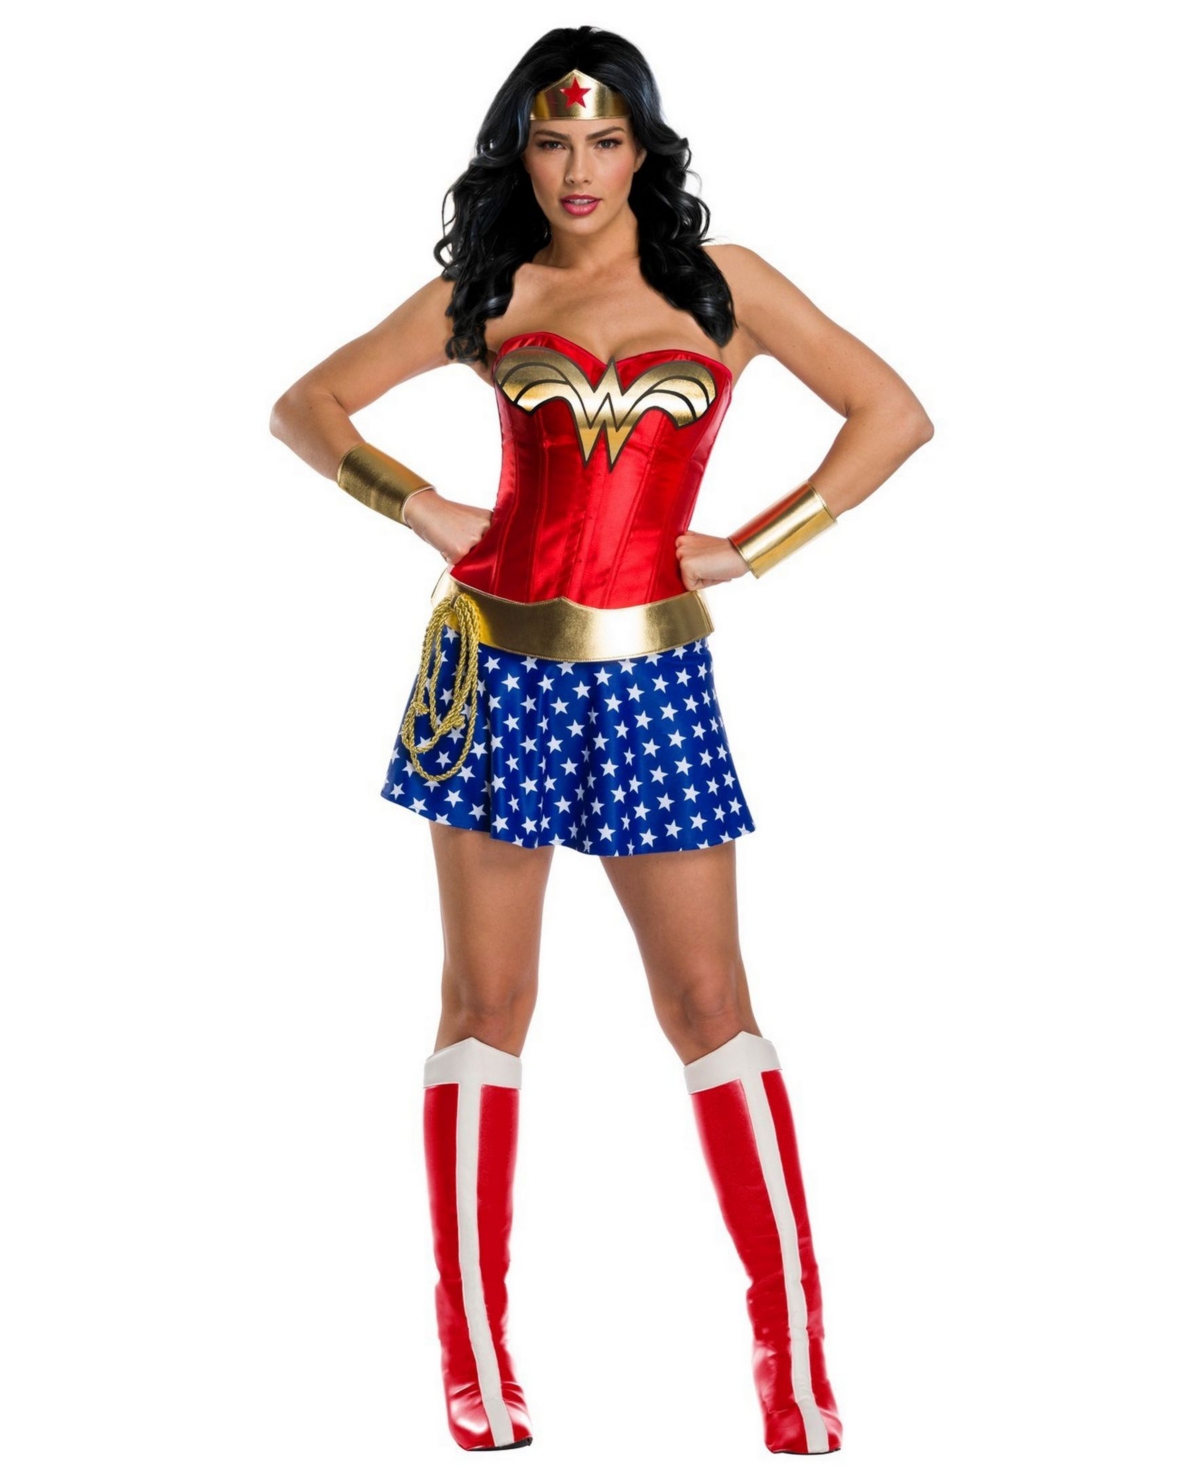 Women's Wonder Woman Plus Size Deluxe Adult Costume - Red